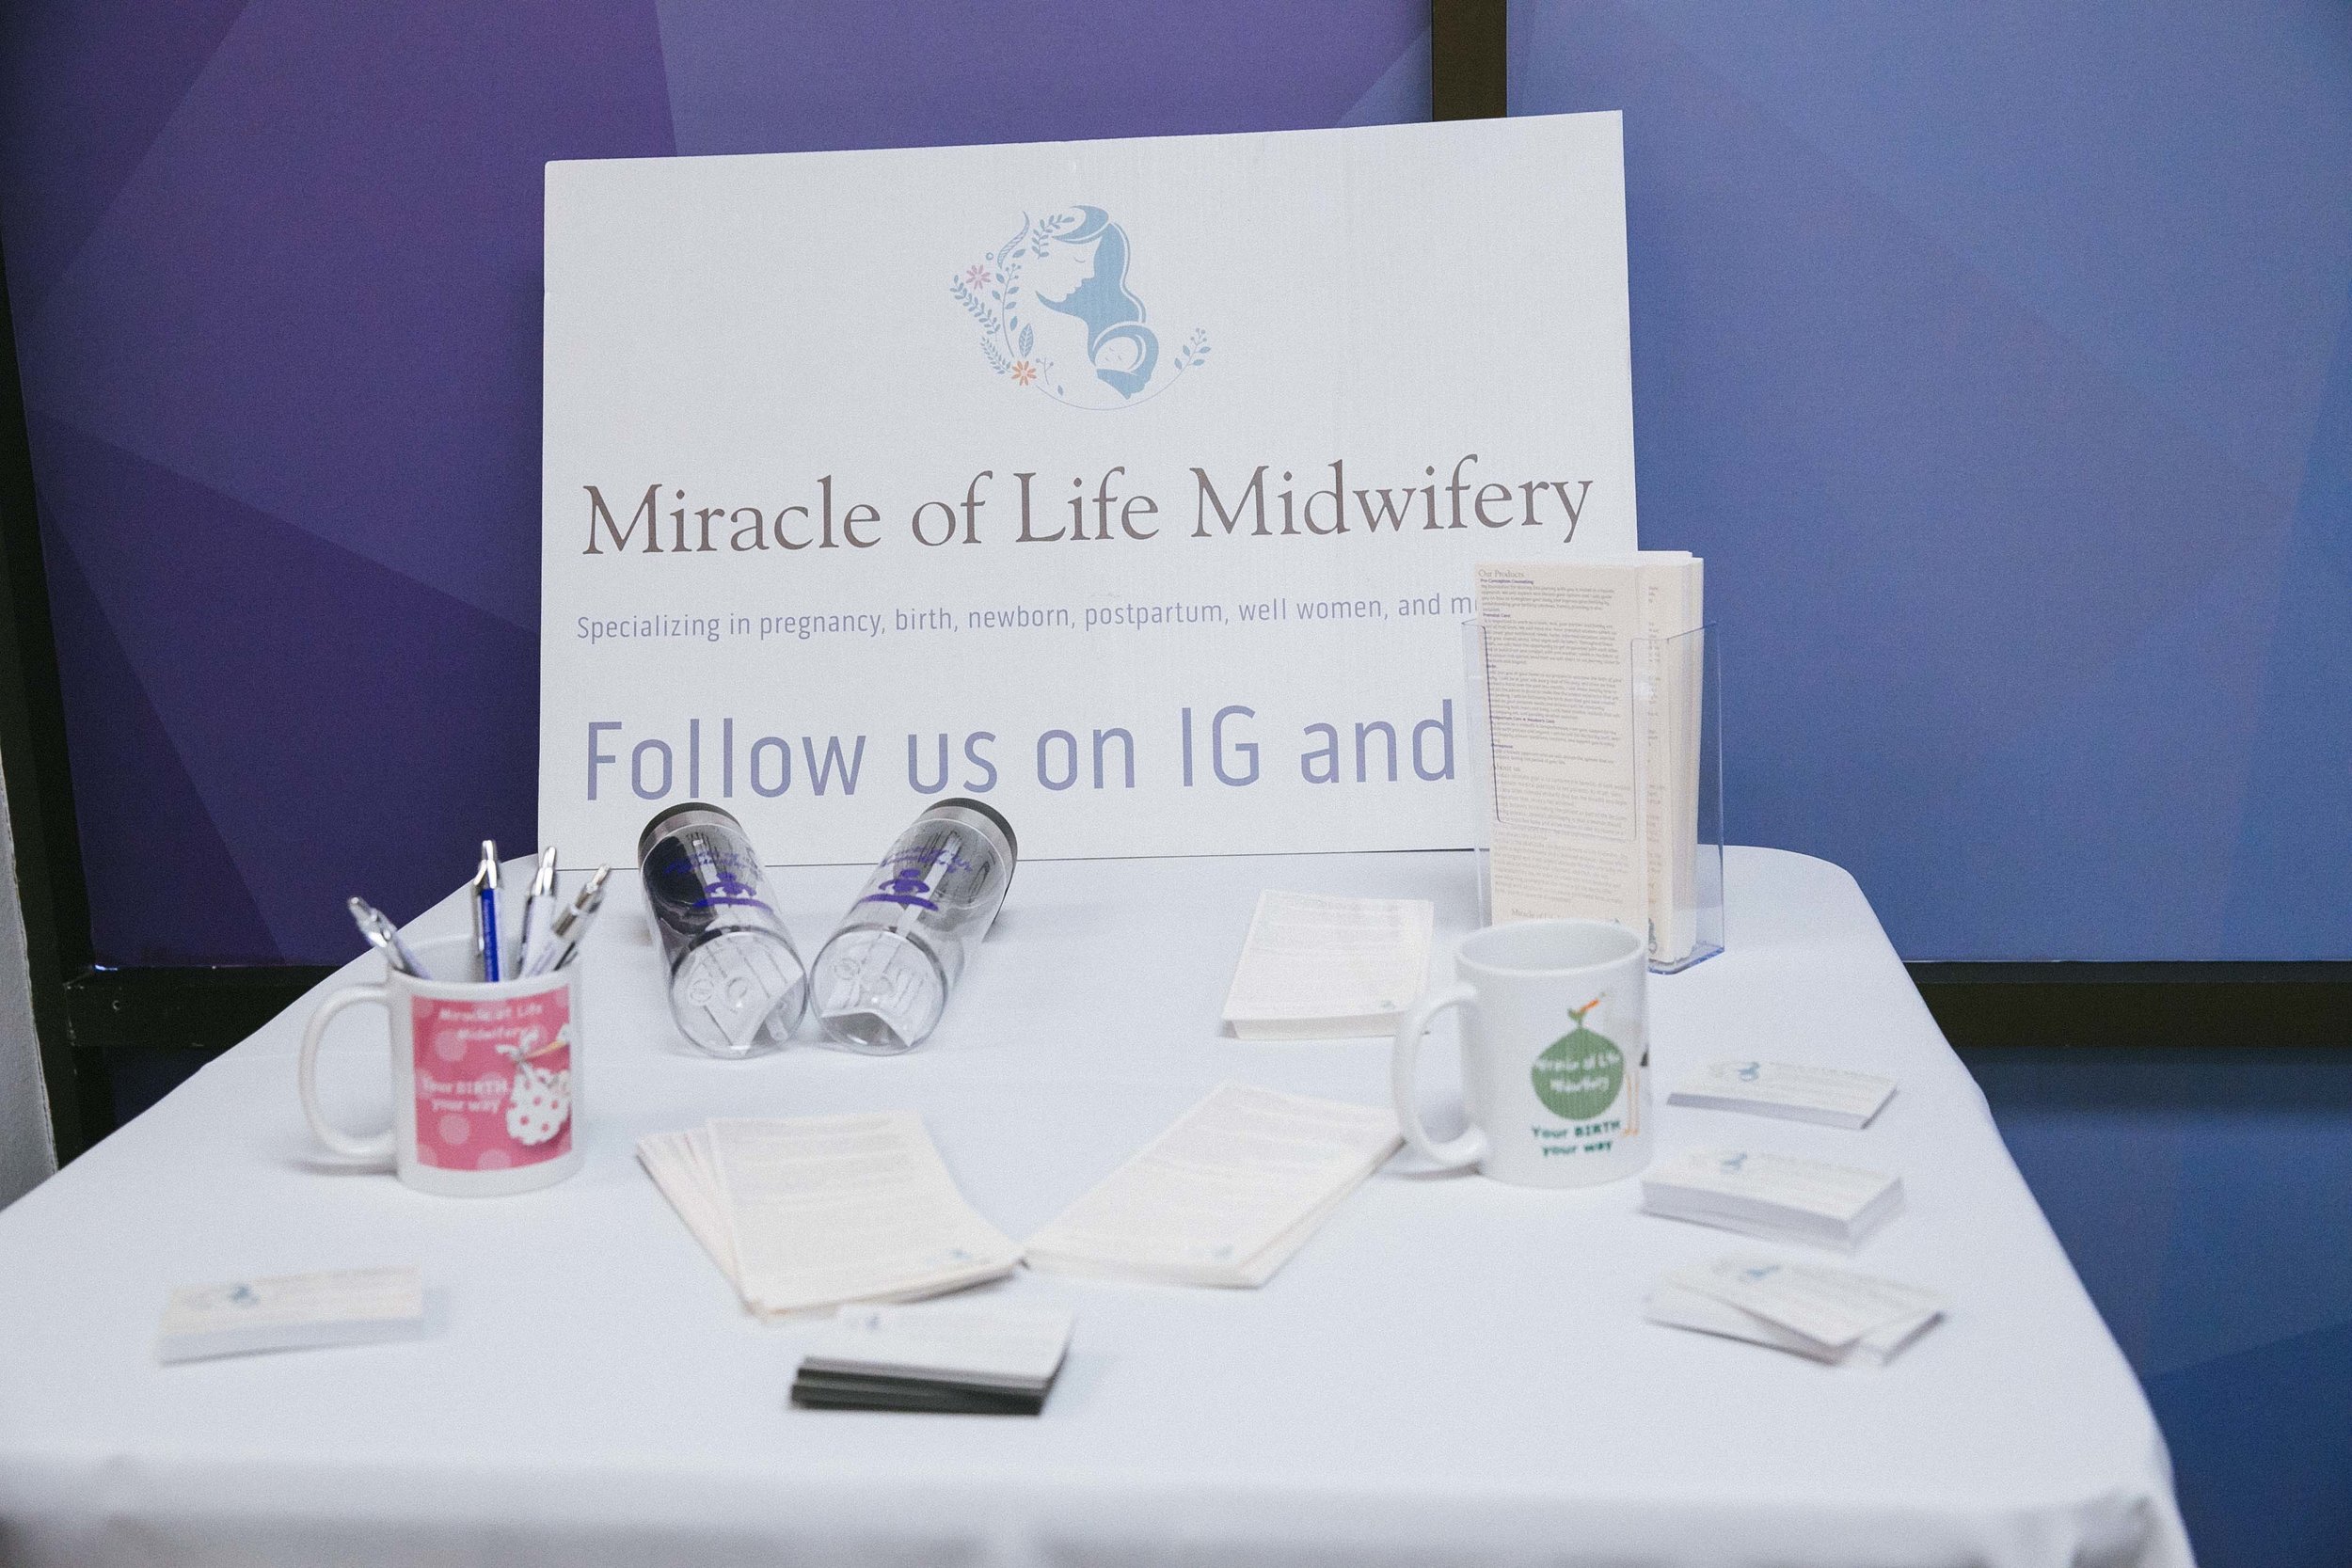 Thanks to Jessica at Miracle of Life Midwifery for sponsoring our event!